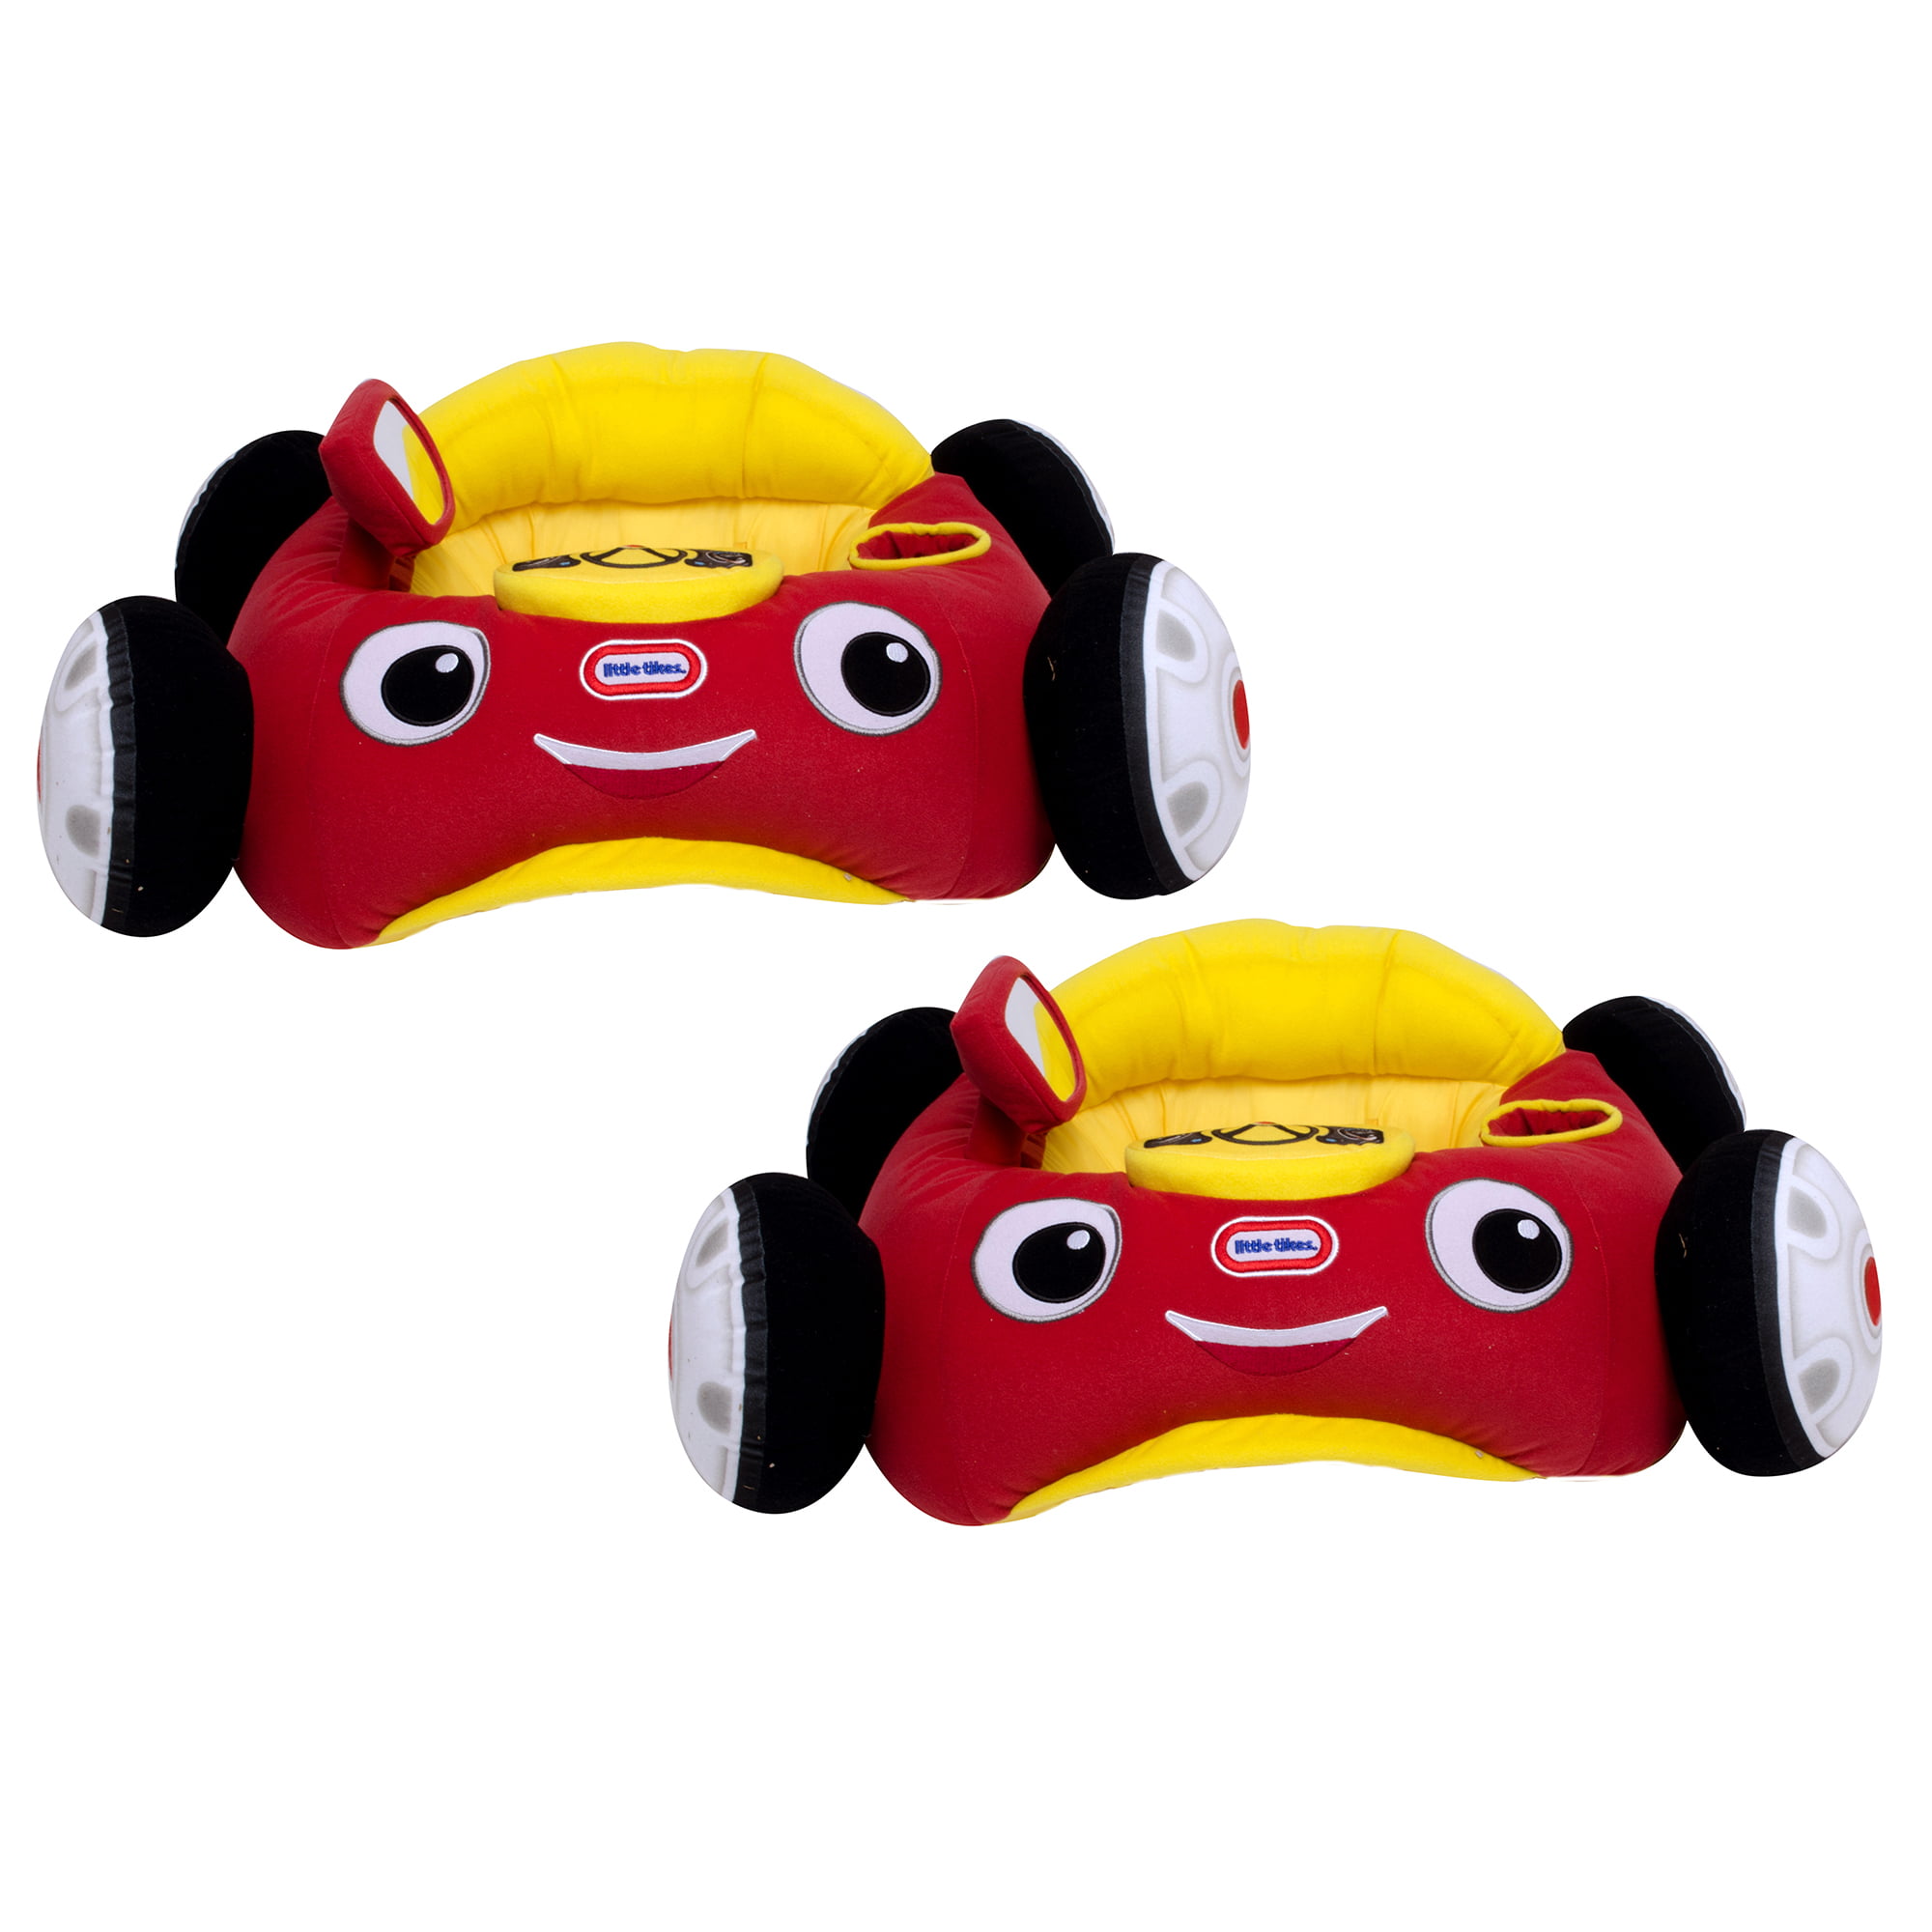 Little Tikes Cozy Coupe Plush Baby Toddler Lounger Floor Seat, Red Car (2 - Walmart.com